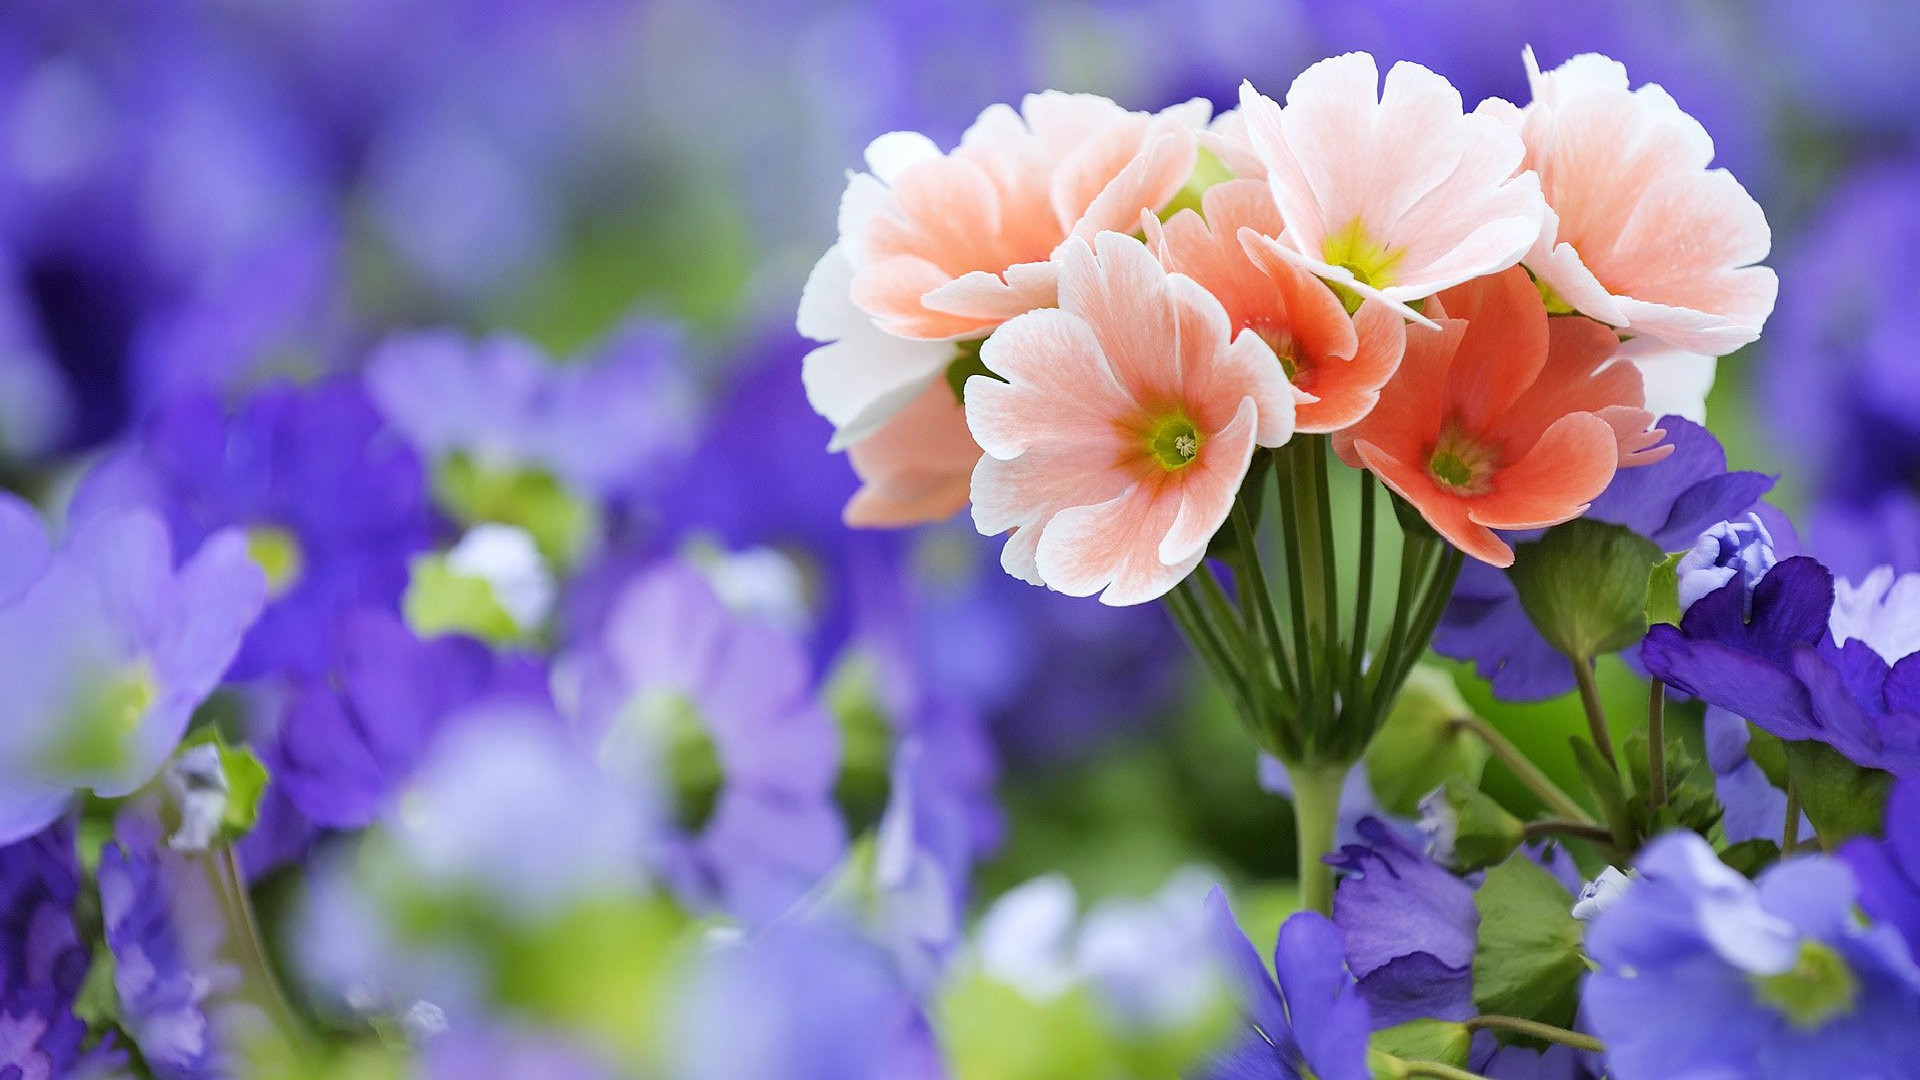 1920x1080 ... Wallpapers of Beautiful Flowers HD, 0.25 Mb, Mitzie Tonkin; Beautiful  Flowers HDQ Images ...